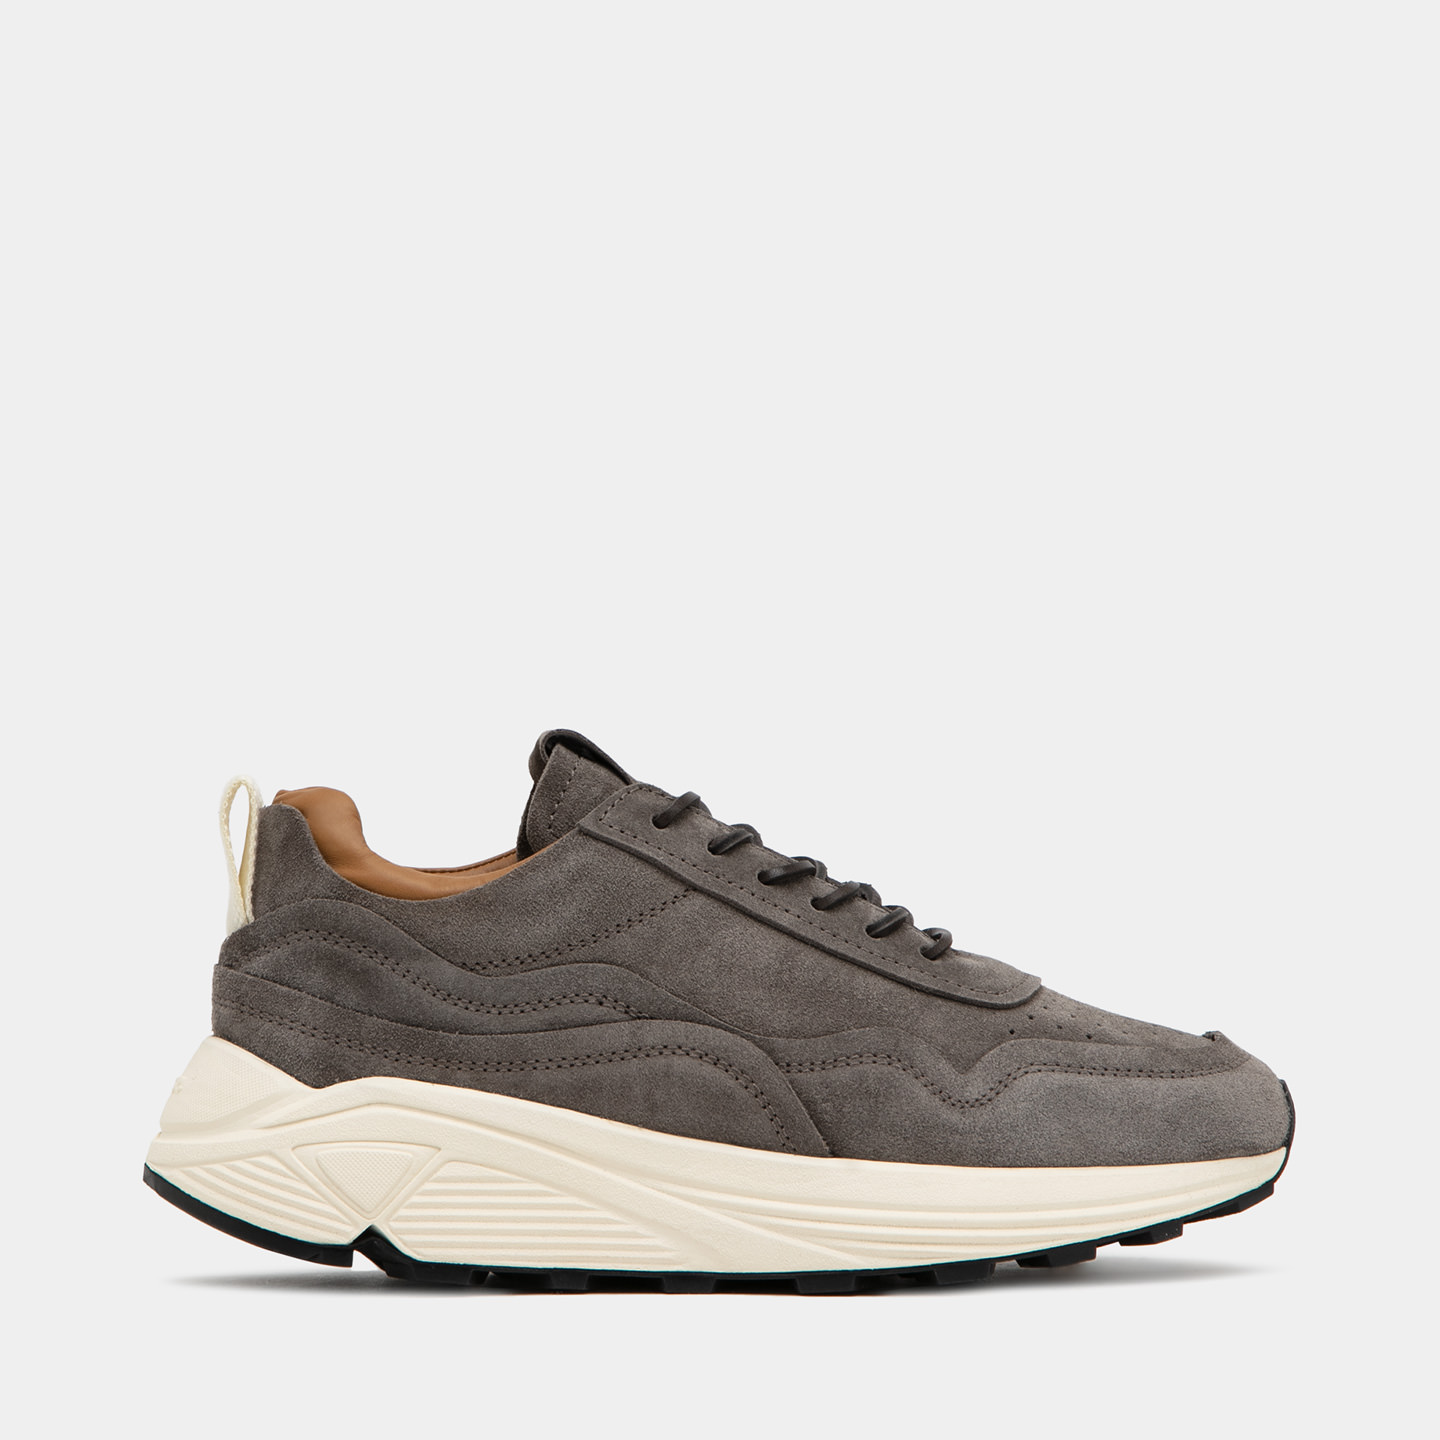 BUTTERO VINCI SNEAKERS IN TAUPE GRAY SUEDE B10050GORH-UG1/21-TAUPE